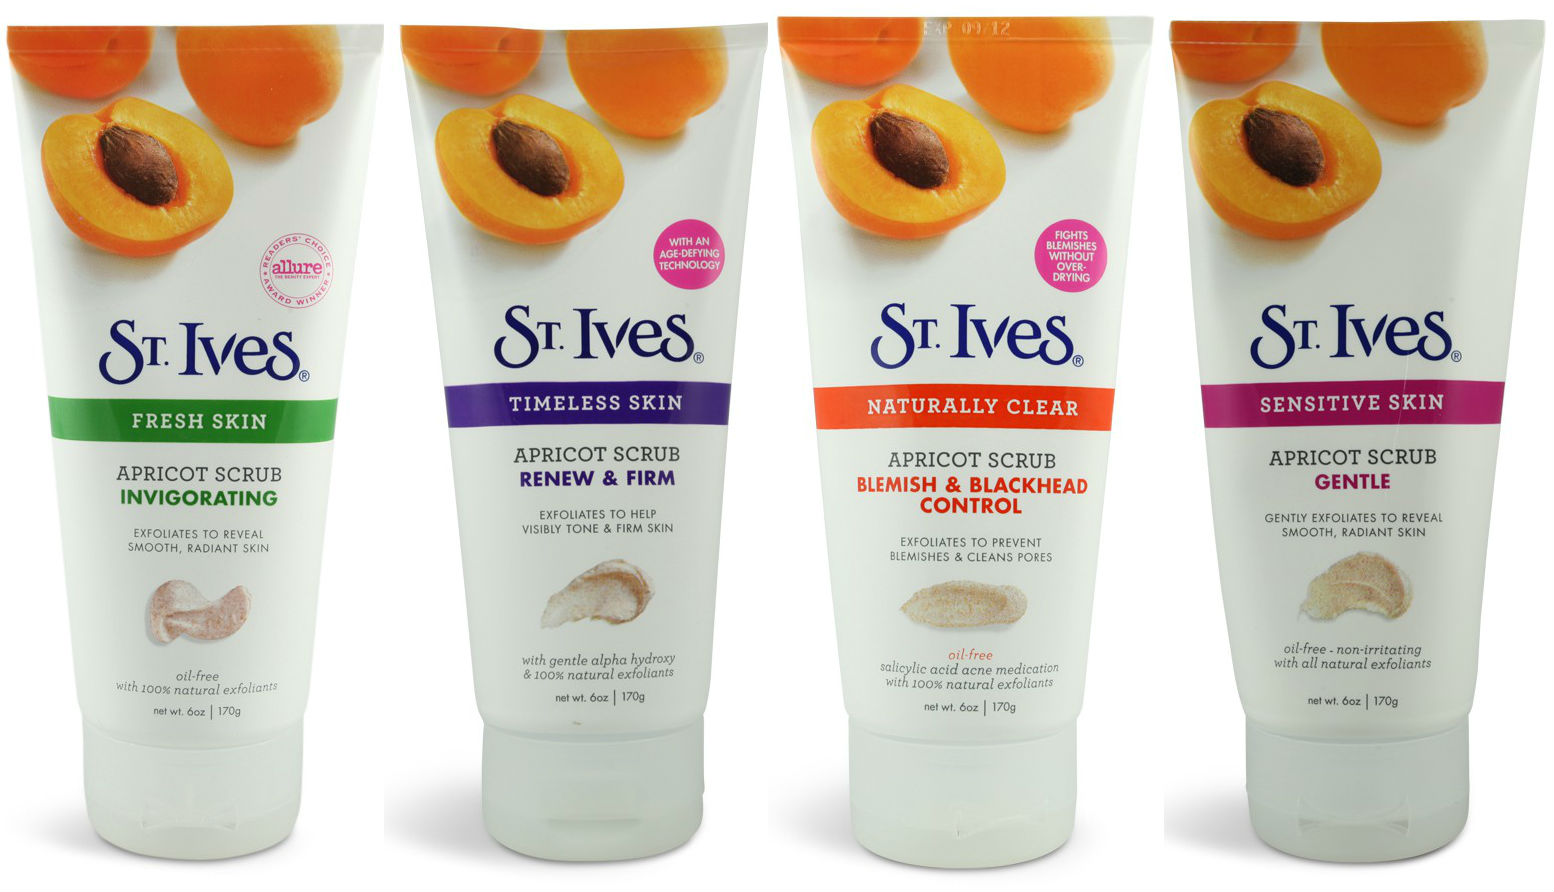 St. Ives Scrubs Only $1.29 at Target